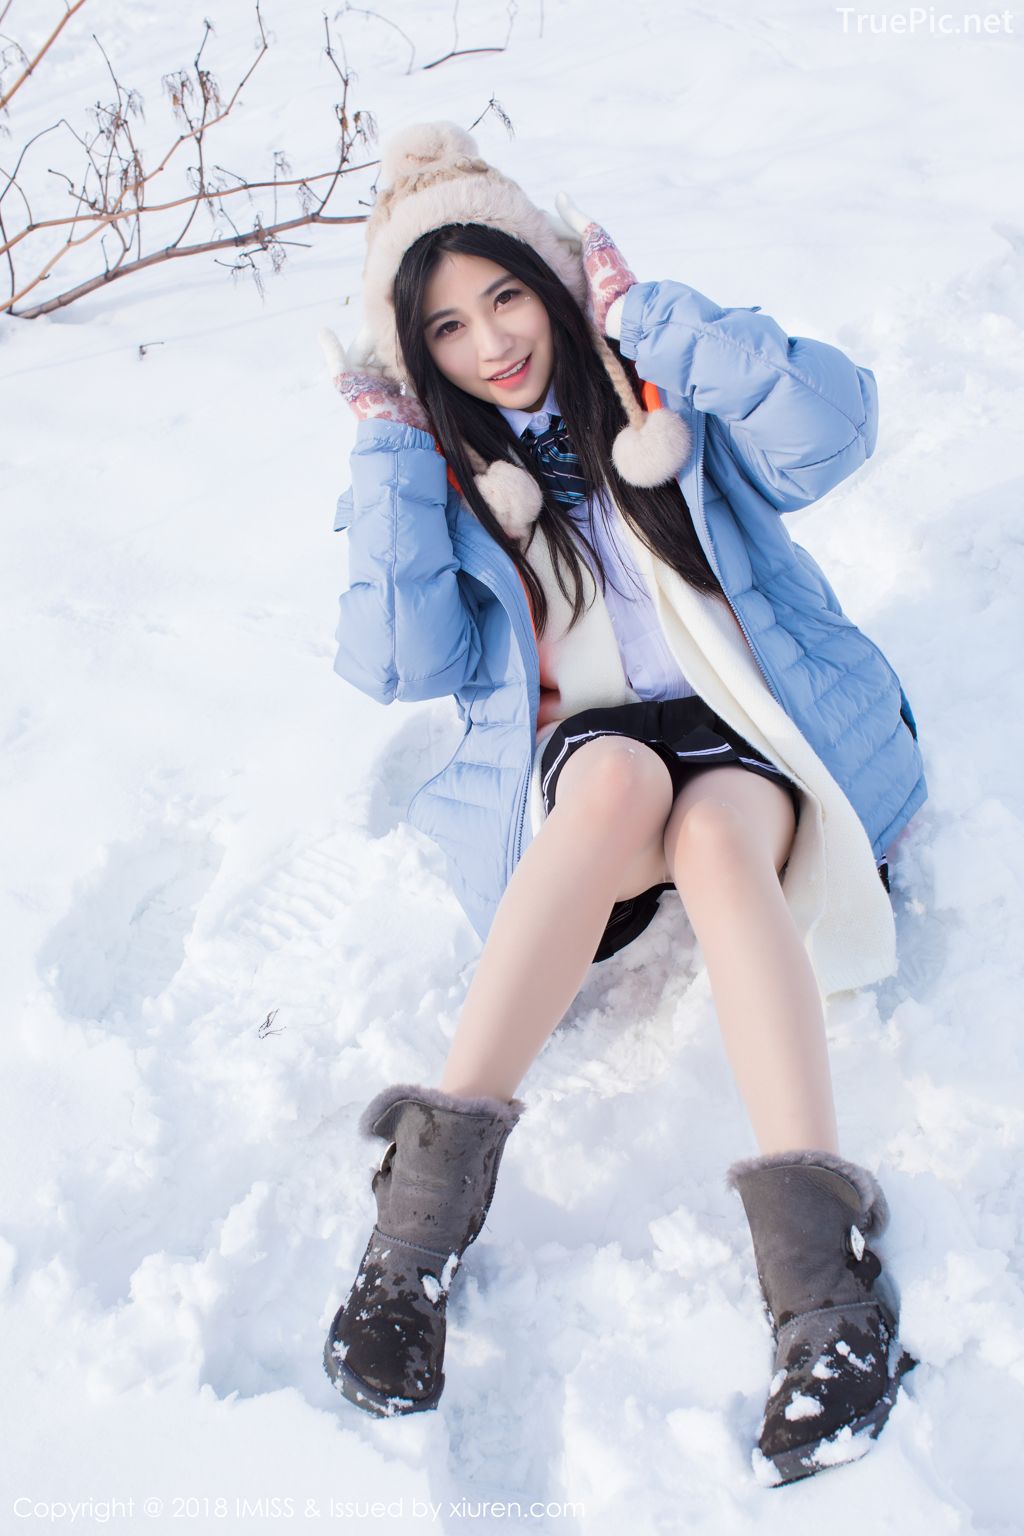 Image-IMISS-Vol.262-Sabrina model–Xu-Nuo-许诺-Sparkling-White-Snow-TruePic.net- Picture-12